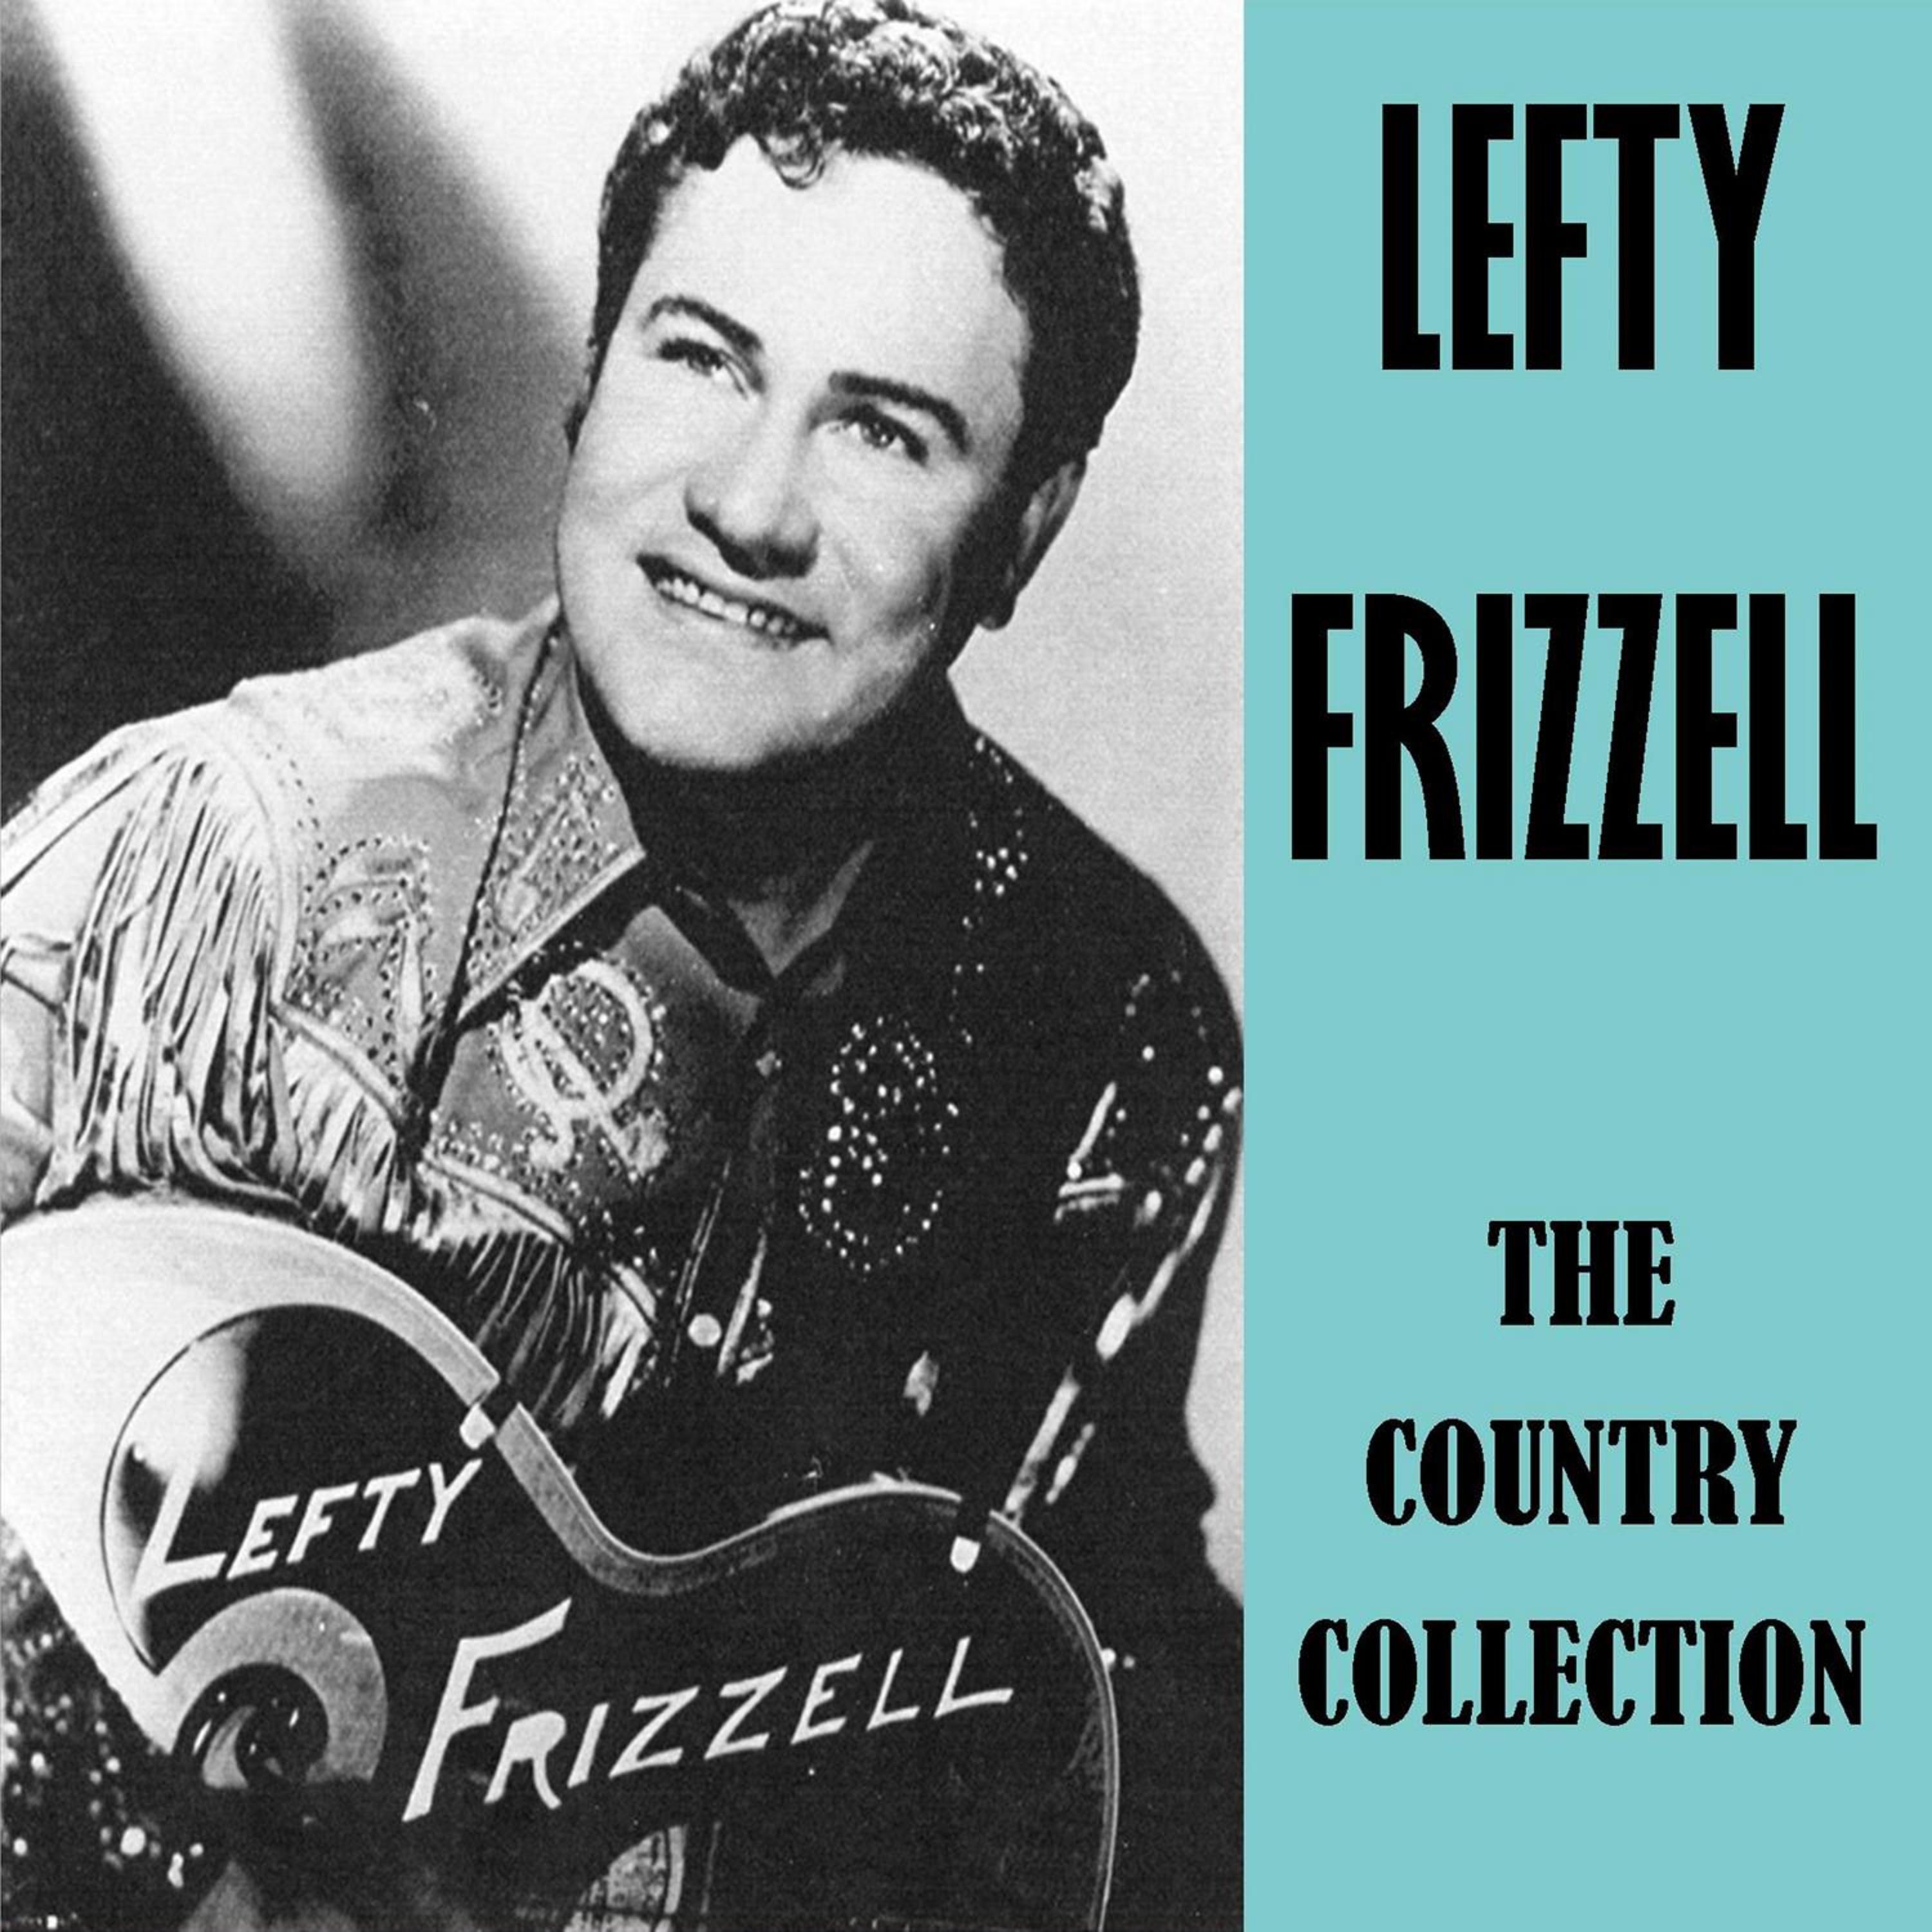 Left collection. Lefty Frizzell. John Frizzell. Wraights Queen Andy Frizzell.